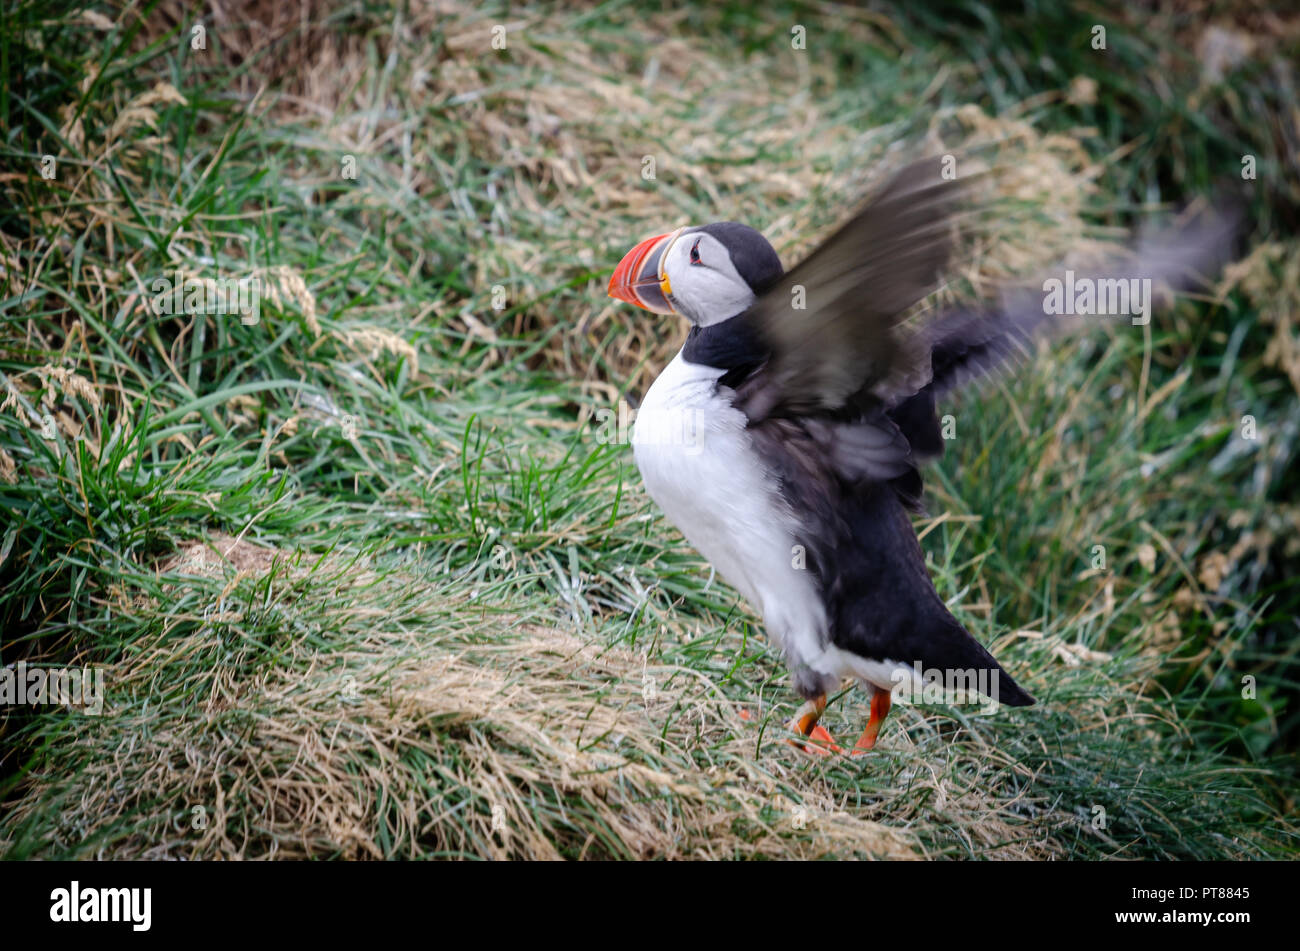 Icelandic puffin flapping wings after coming home Stock Photo